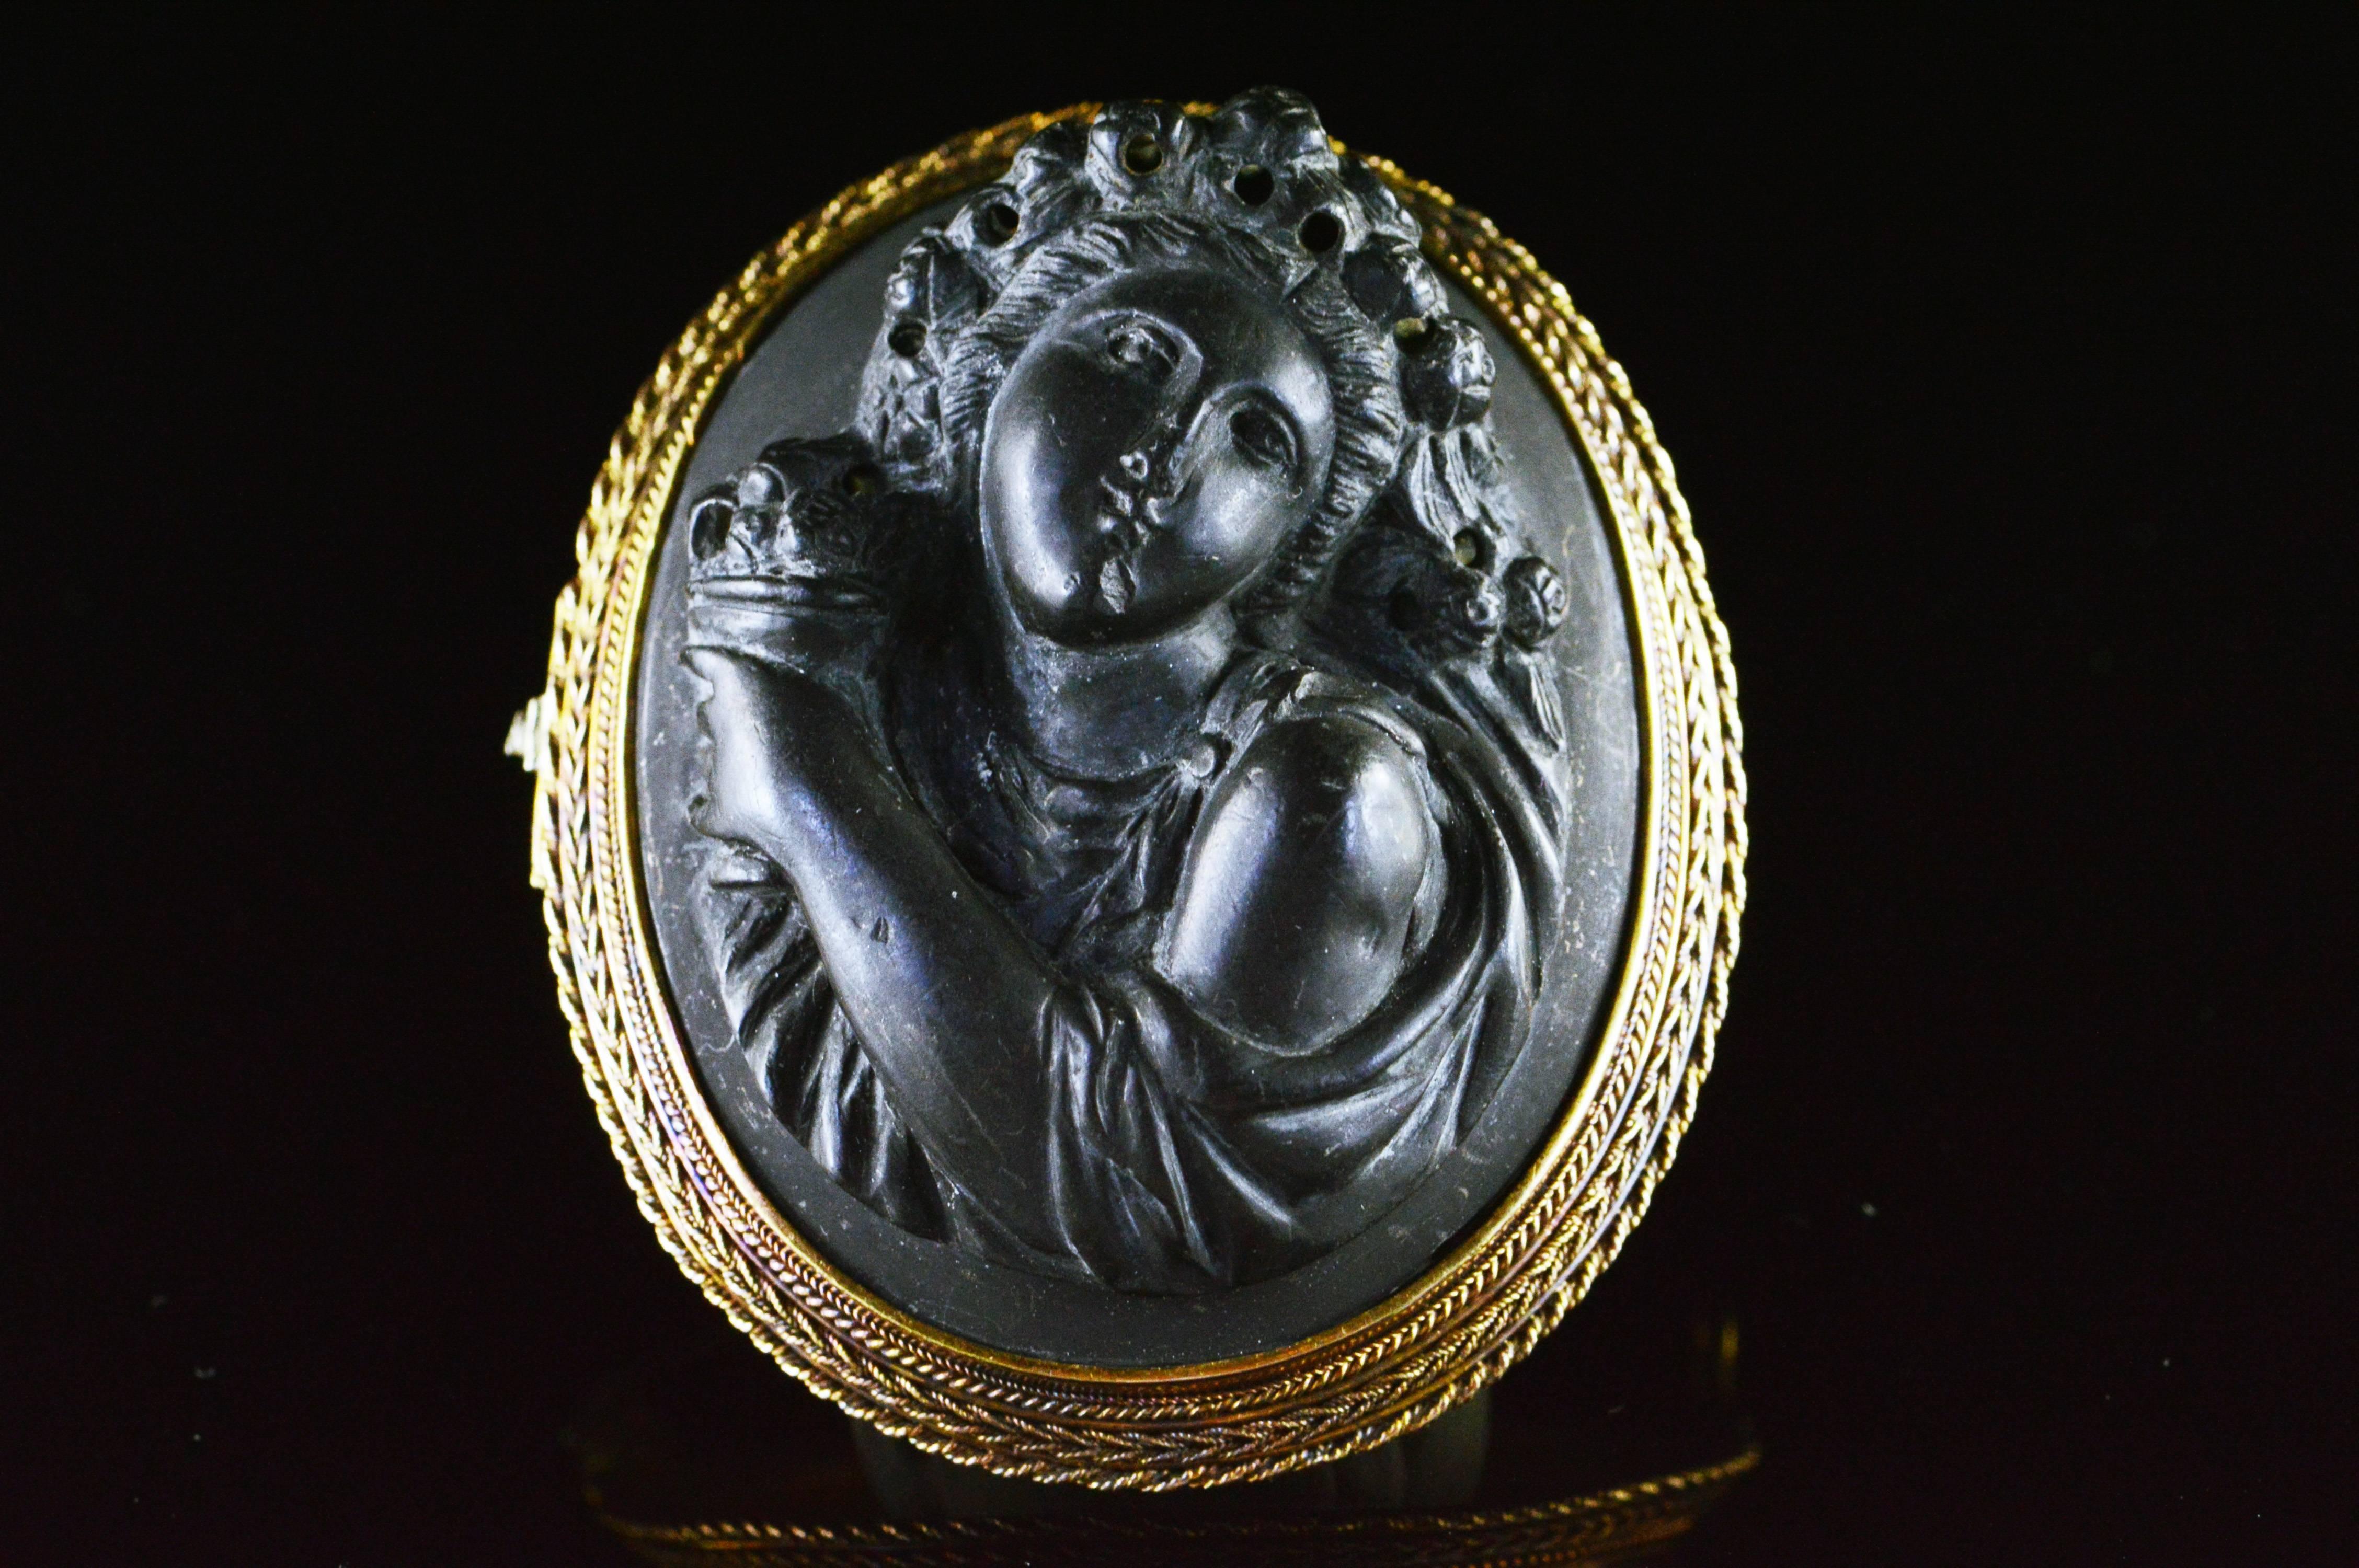 This is a hand carved beautifully detailed female figure cameo. This brooch is carved in high relief into black lava stone with incredible detail. This item is believed to date from the 1860's or 1870's and is an exquisite statement piece.

All